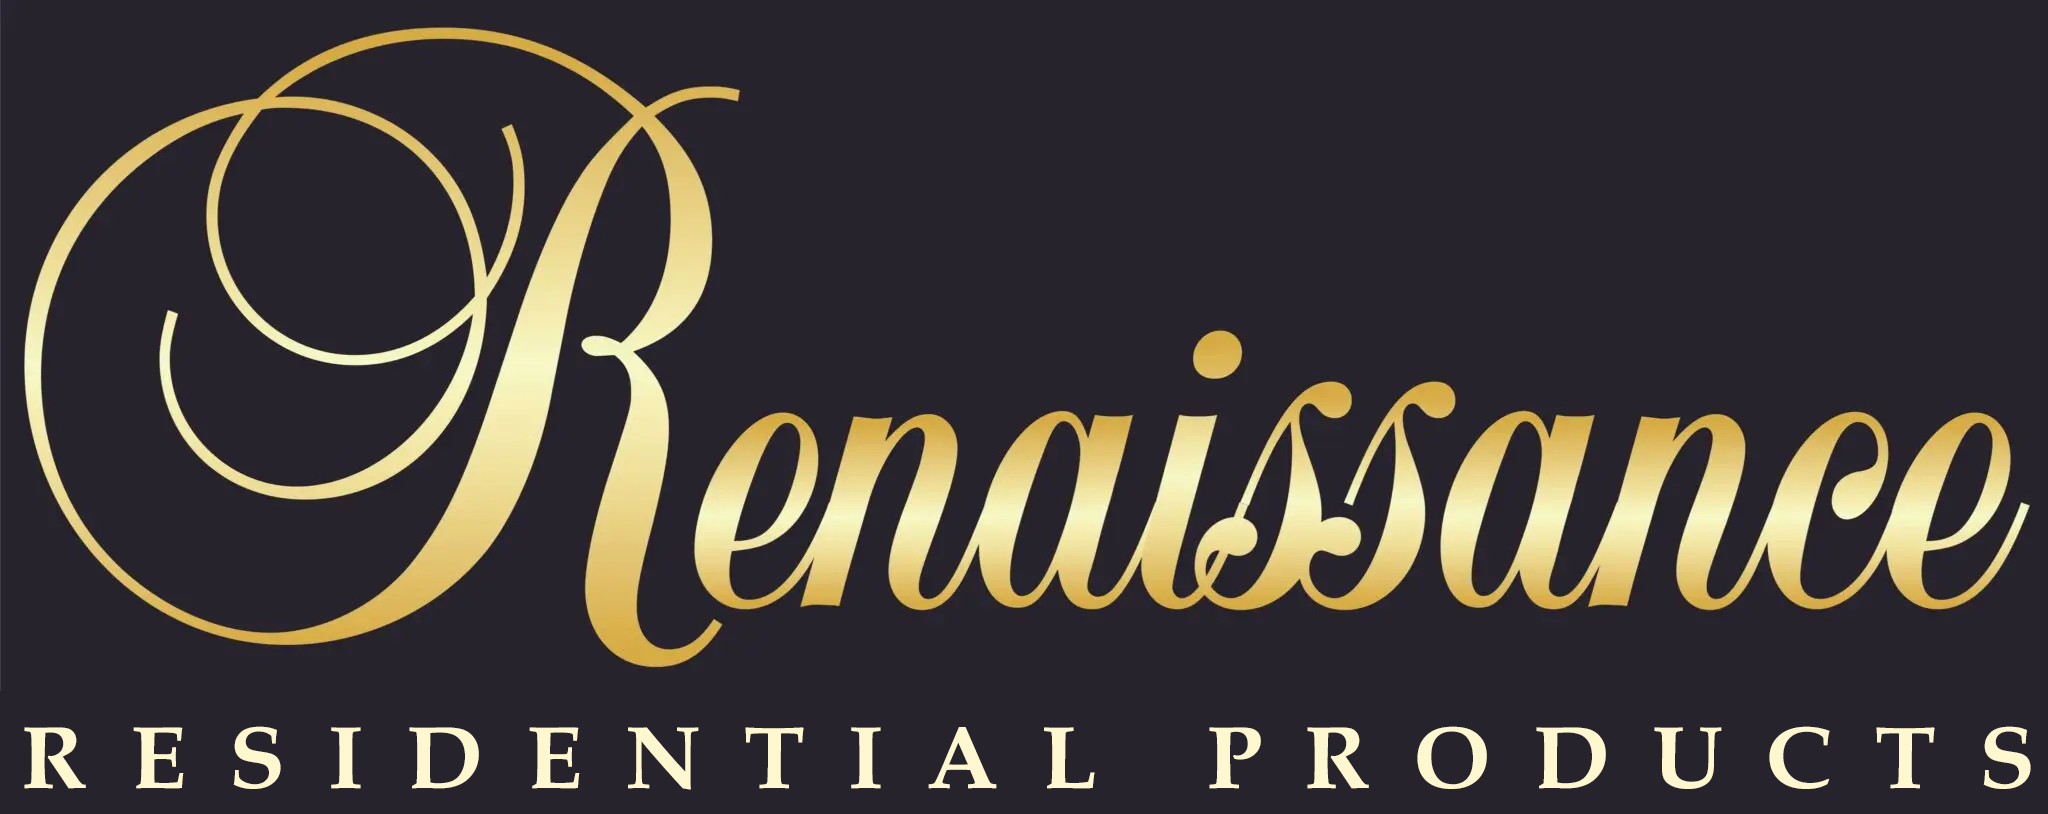 Renaissance Residential Products